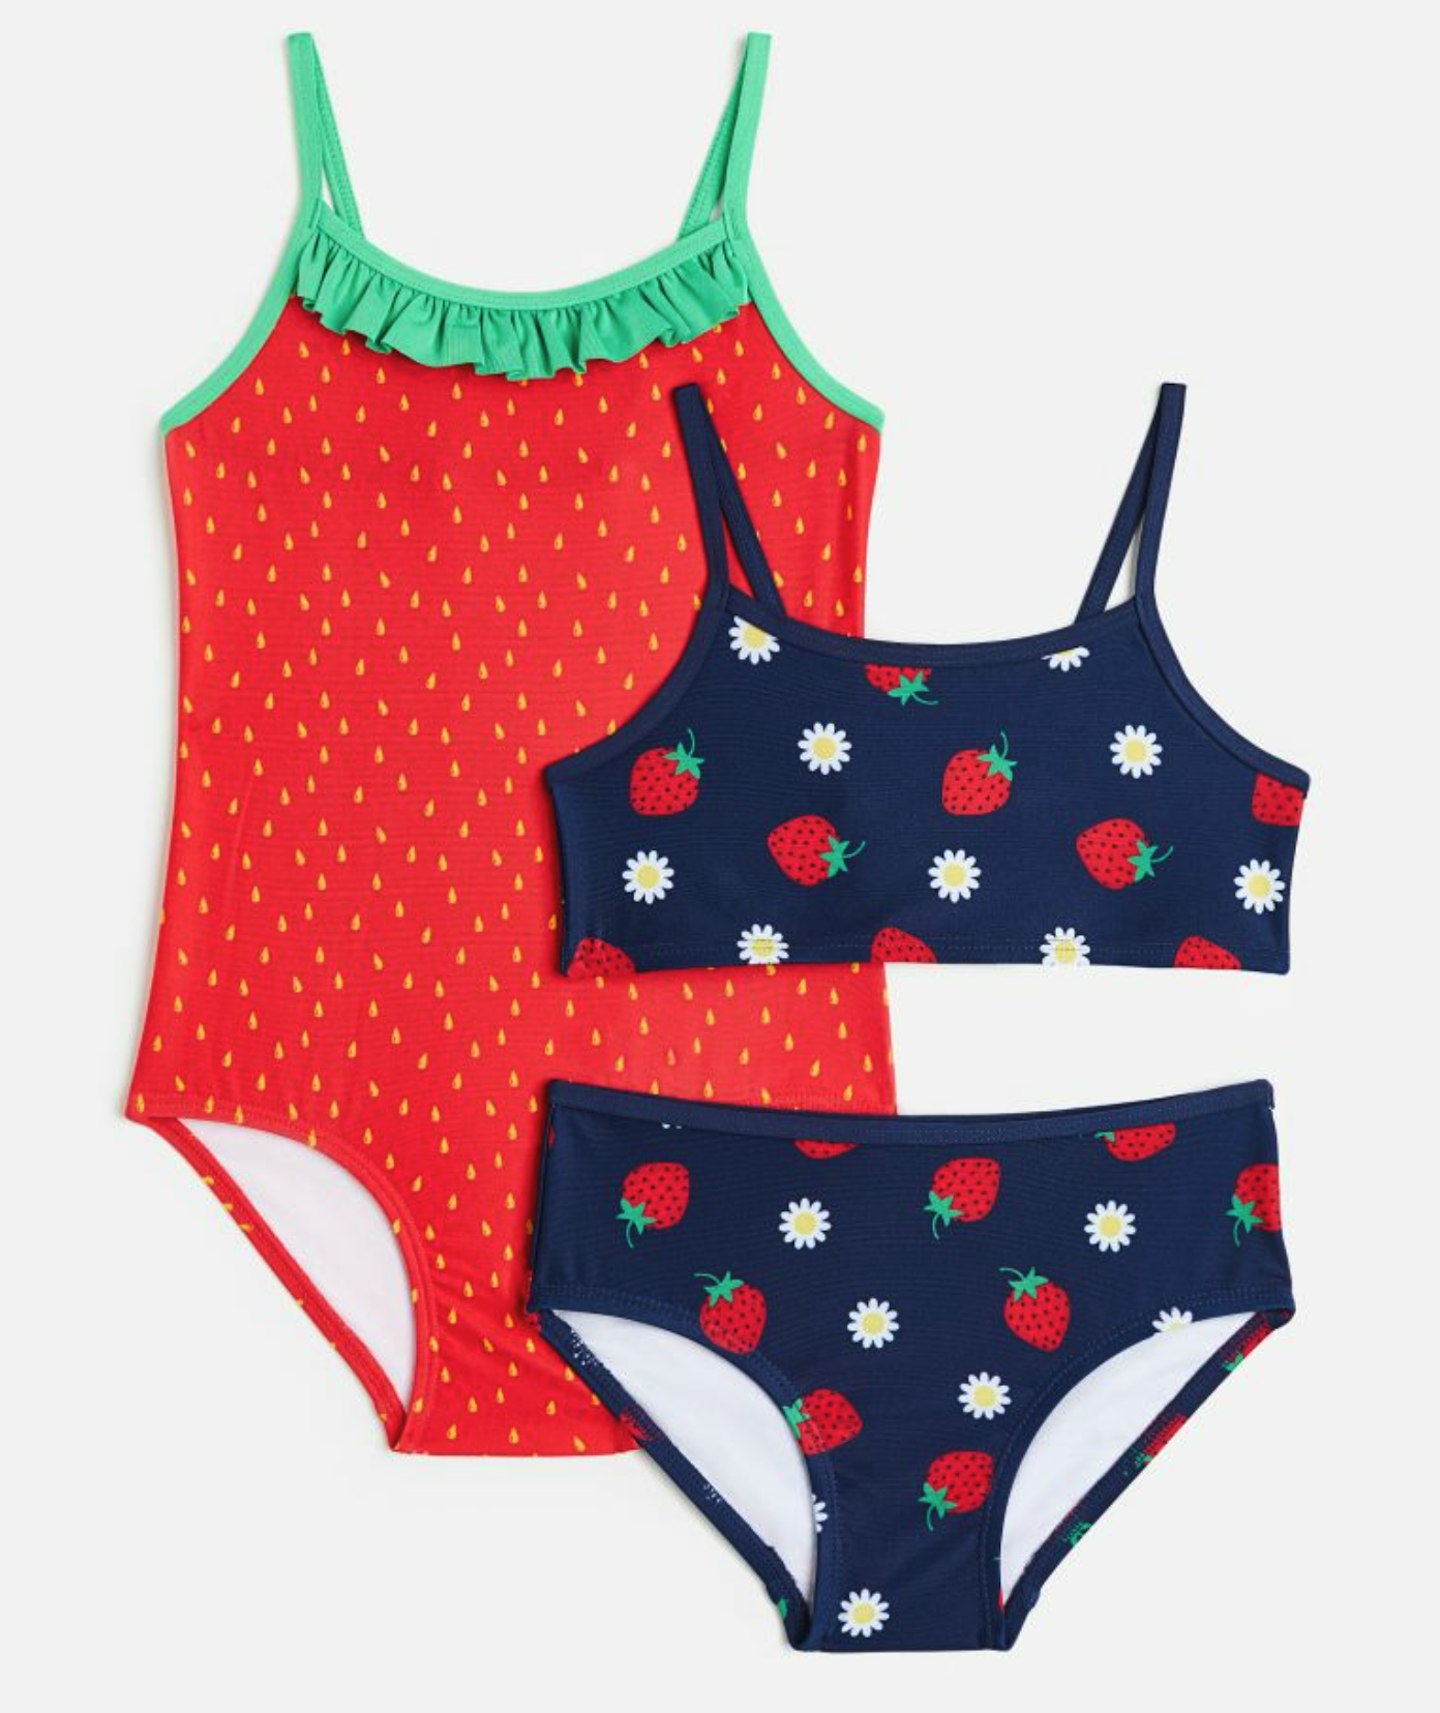 H&M Red/Navy Kids' Patterned Swimsuit